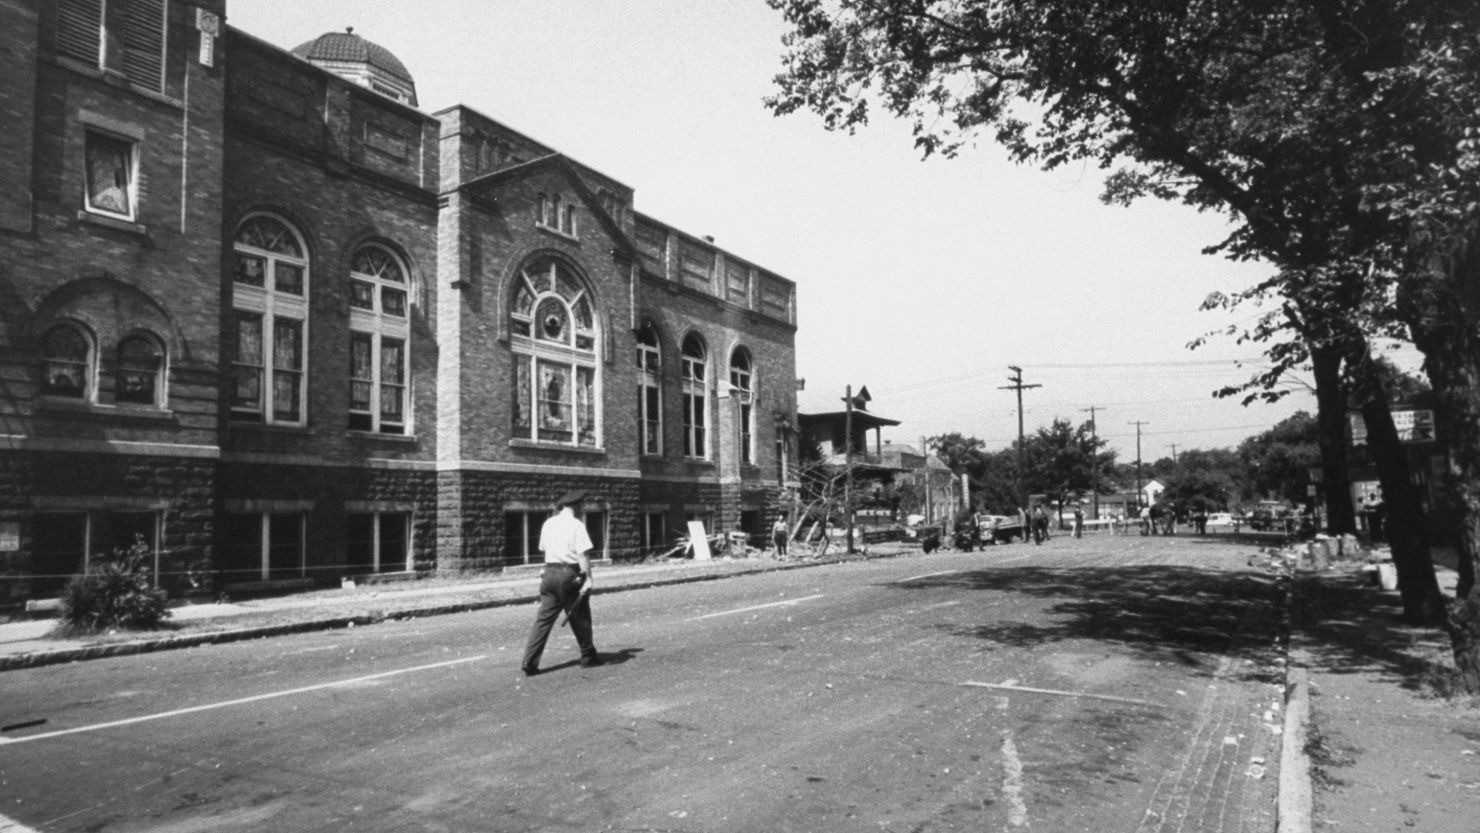 The 16th Street Baptist Church served as a meeting place during the civil rights moment. It was declared a national historic landmark in 2006.